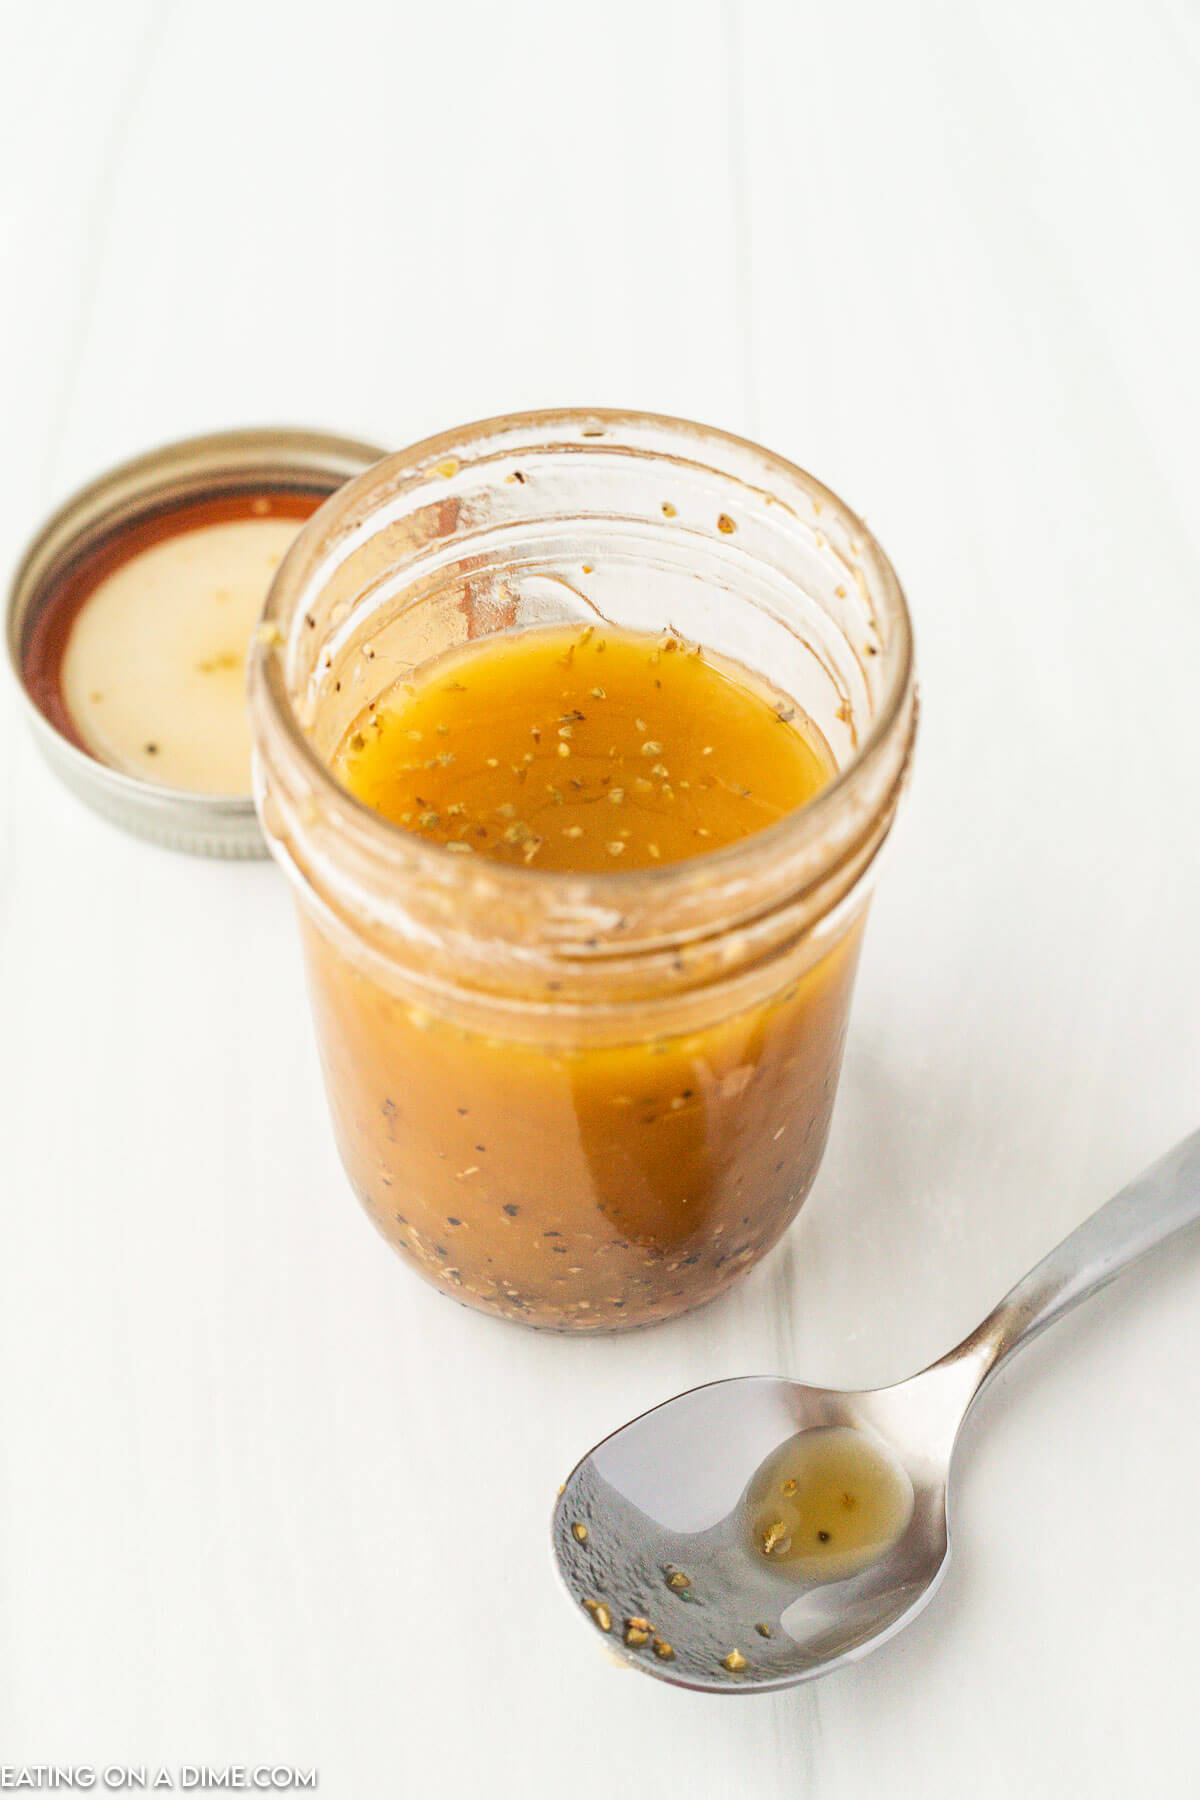 Mixing the dressing together in a jar